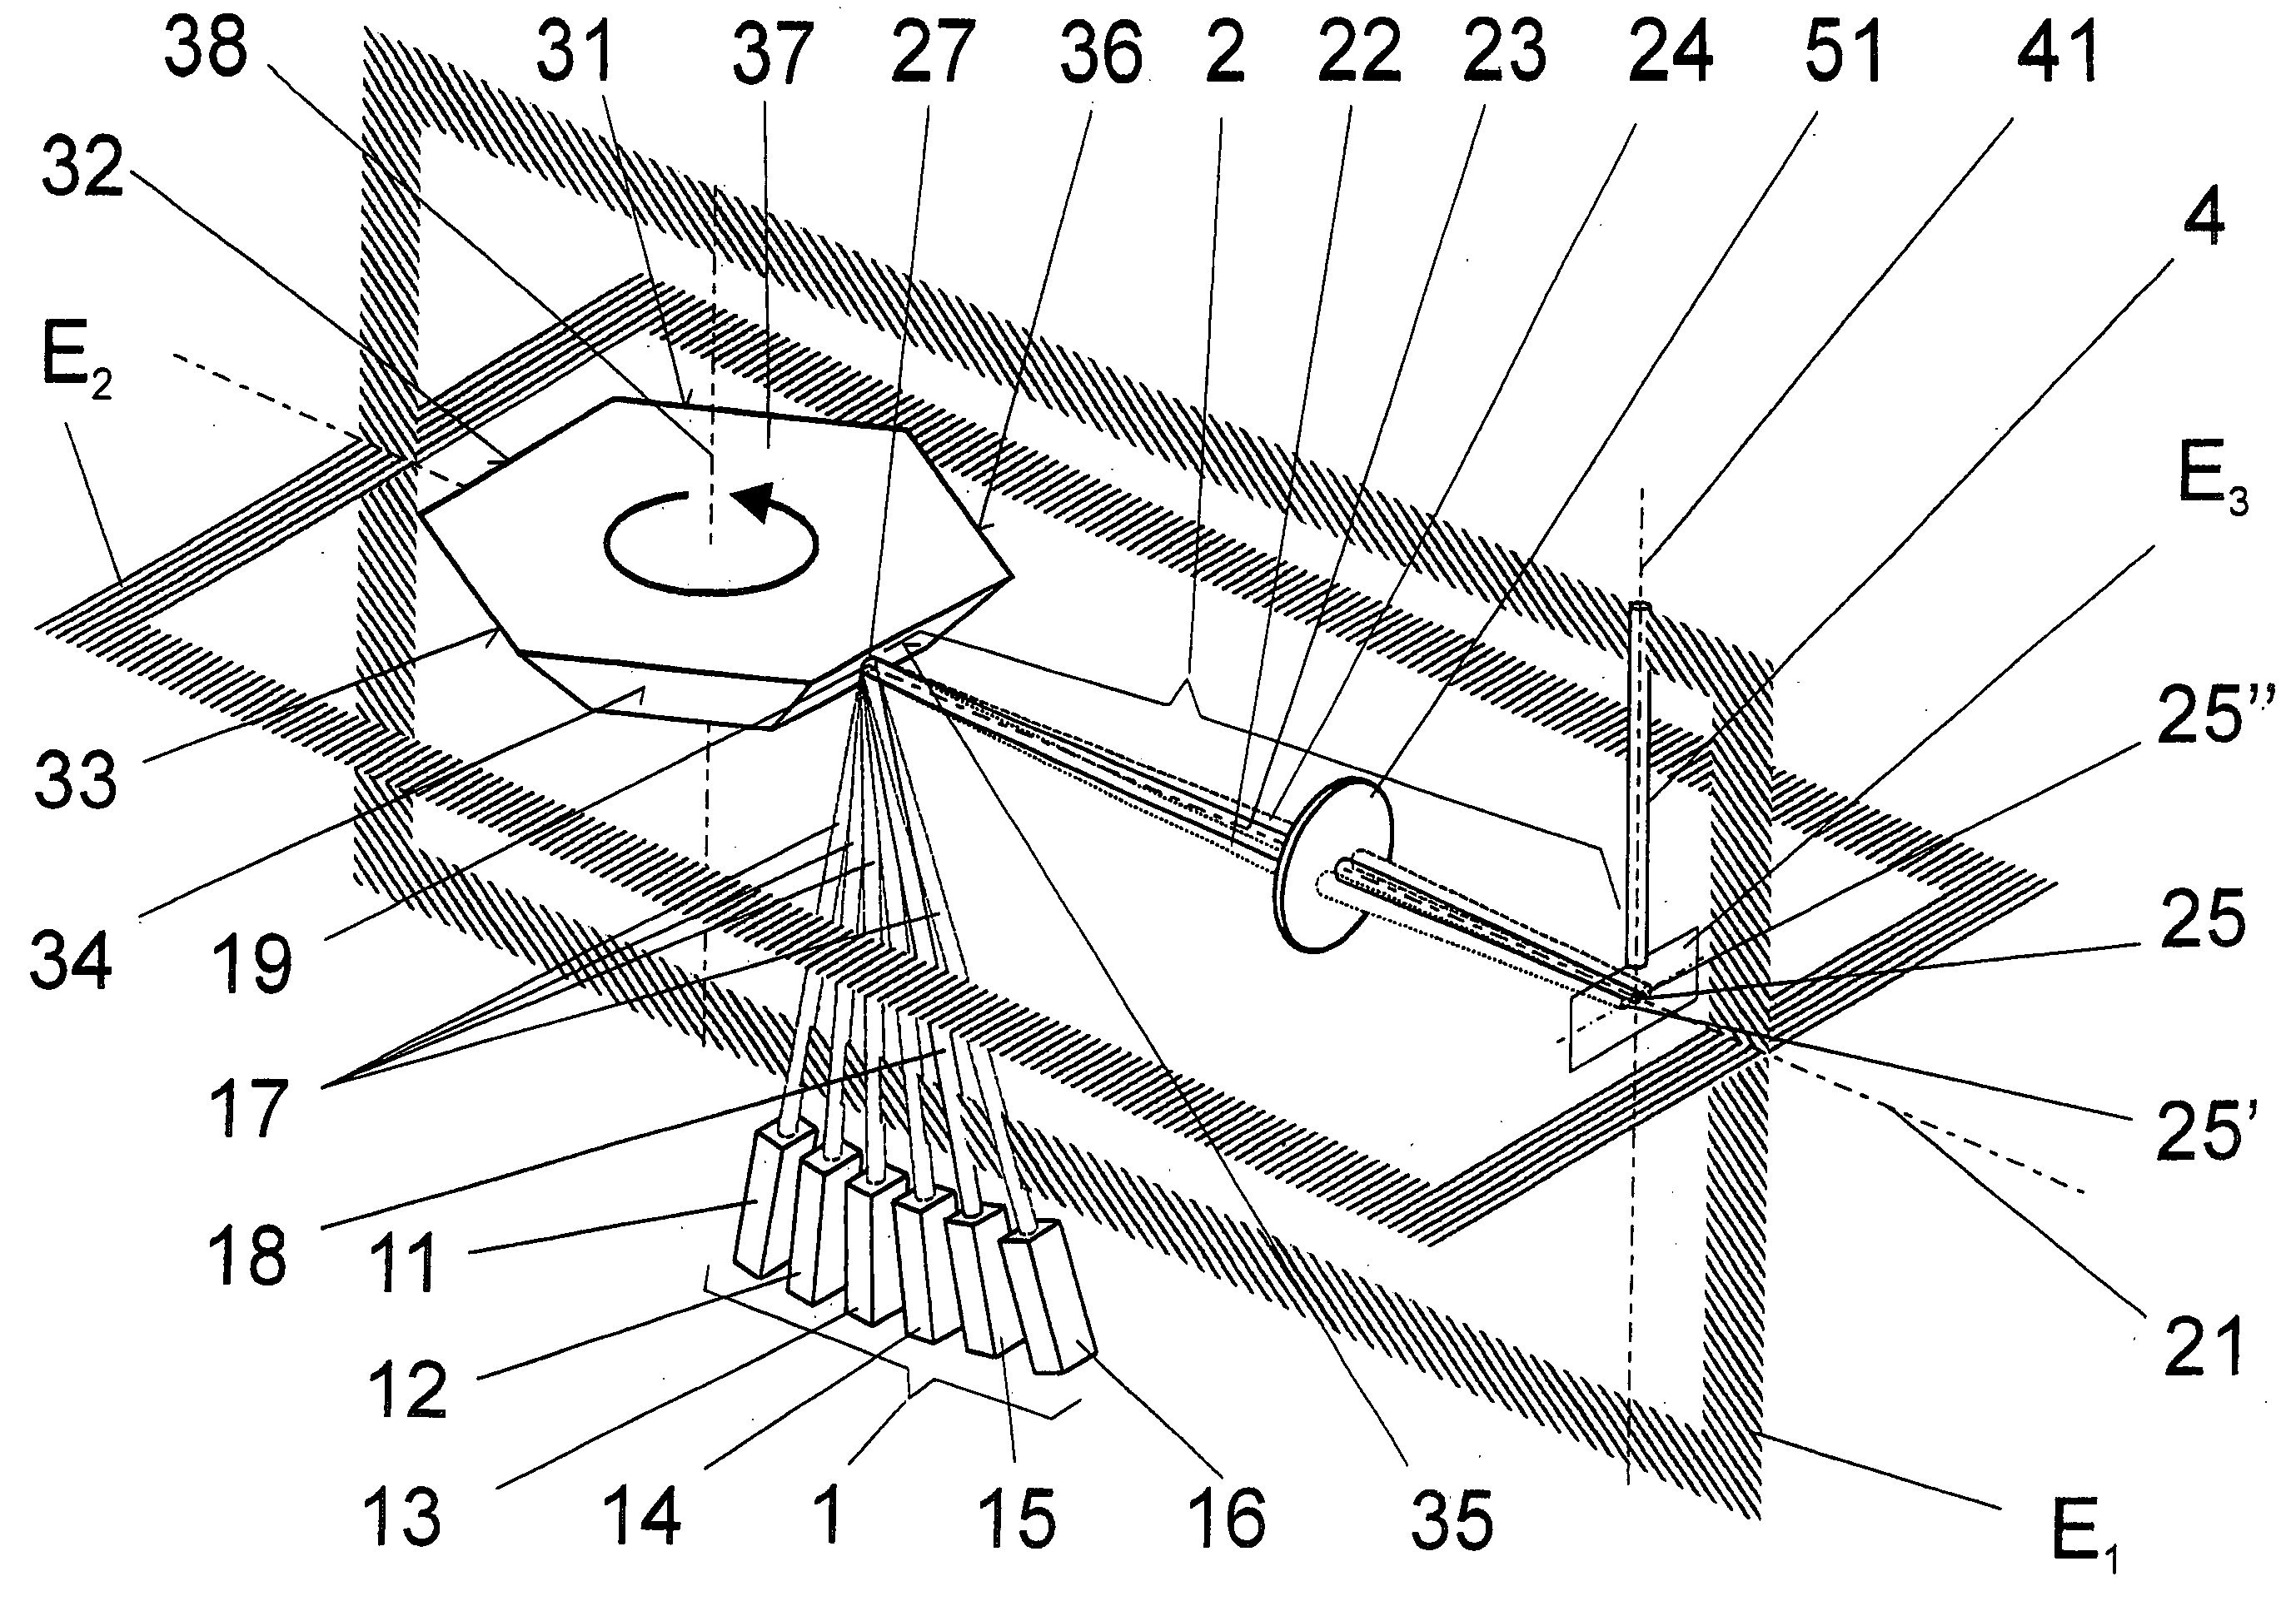 Arrangement for the generation of a pulsed laser beam of high average output